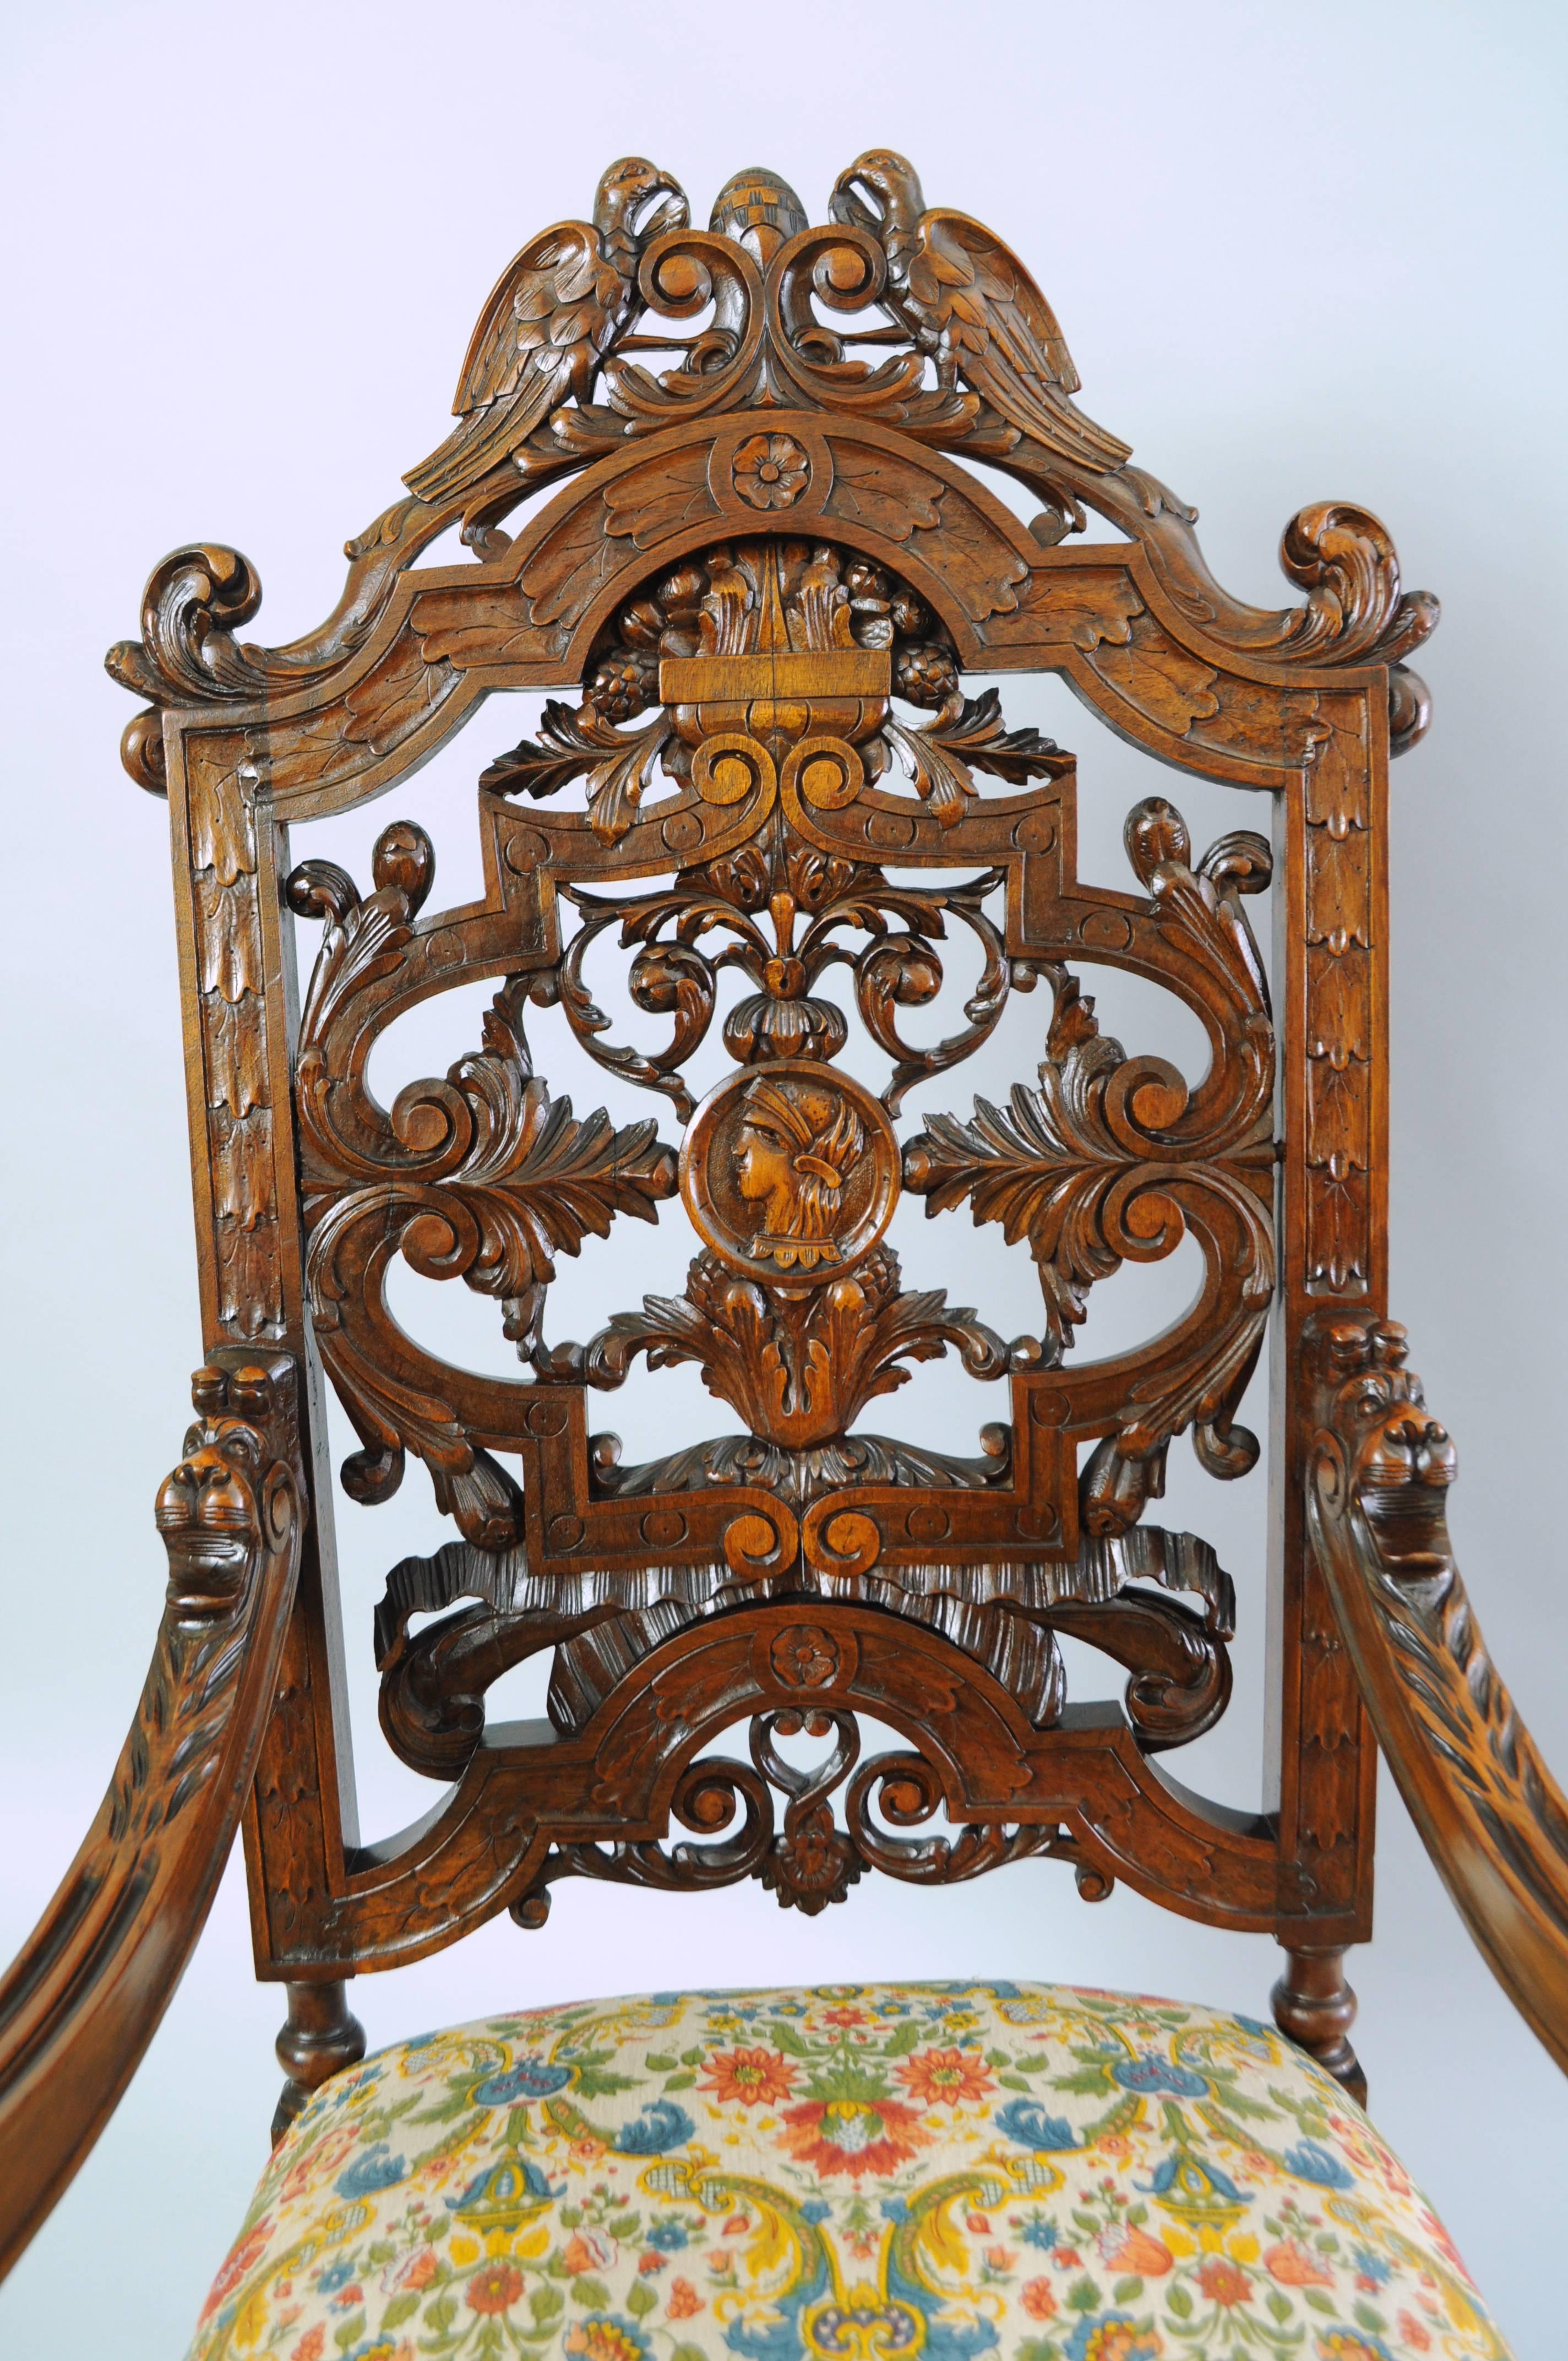 Early 20th century figural carved walnut Italian Renaissance revival throne chair. Item features a high back, solid carved walnut frame with bird crest, pierce carved acanthus leaves throughout, lion heads on the armrests, central carved medallion